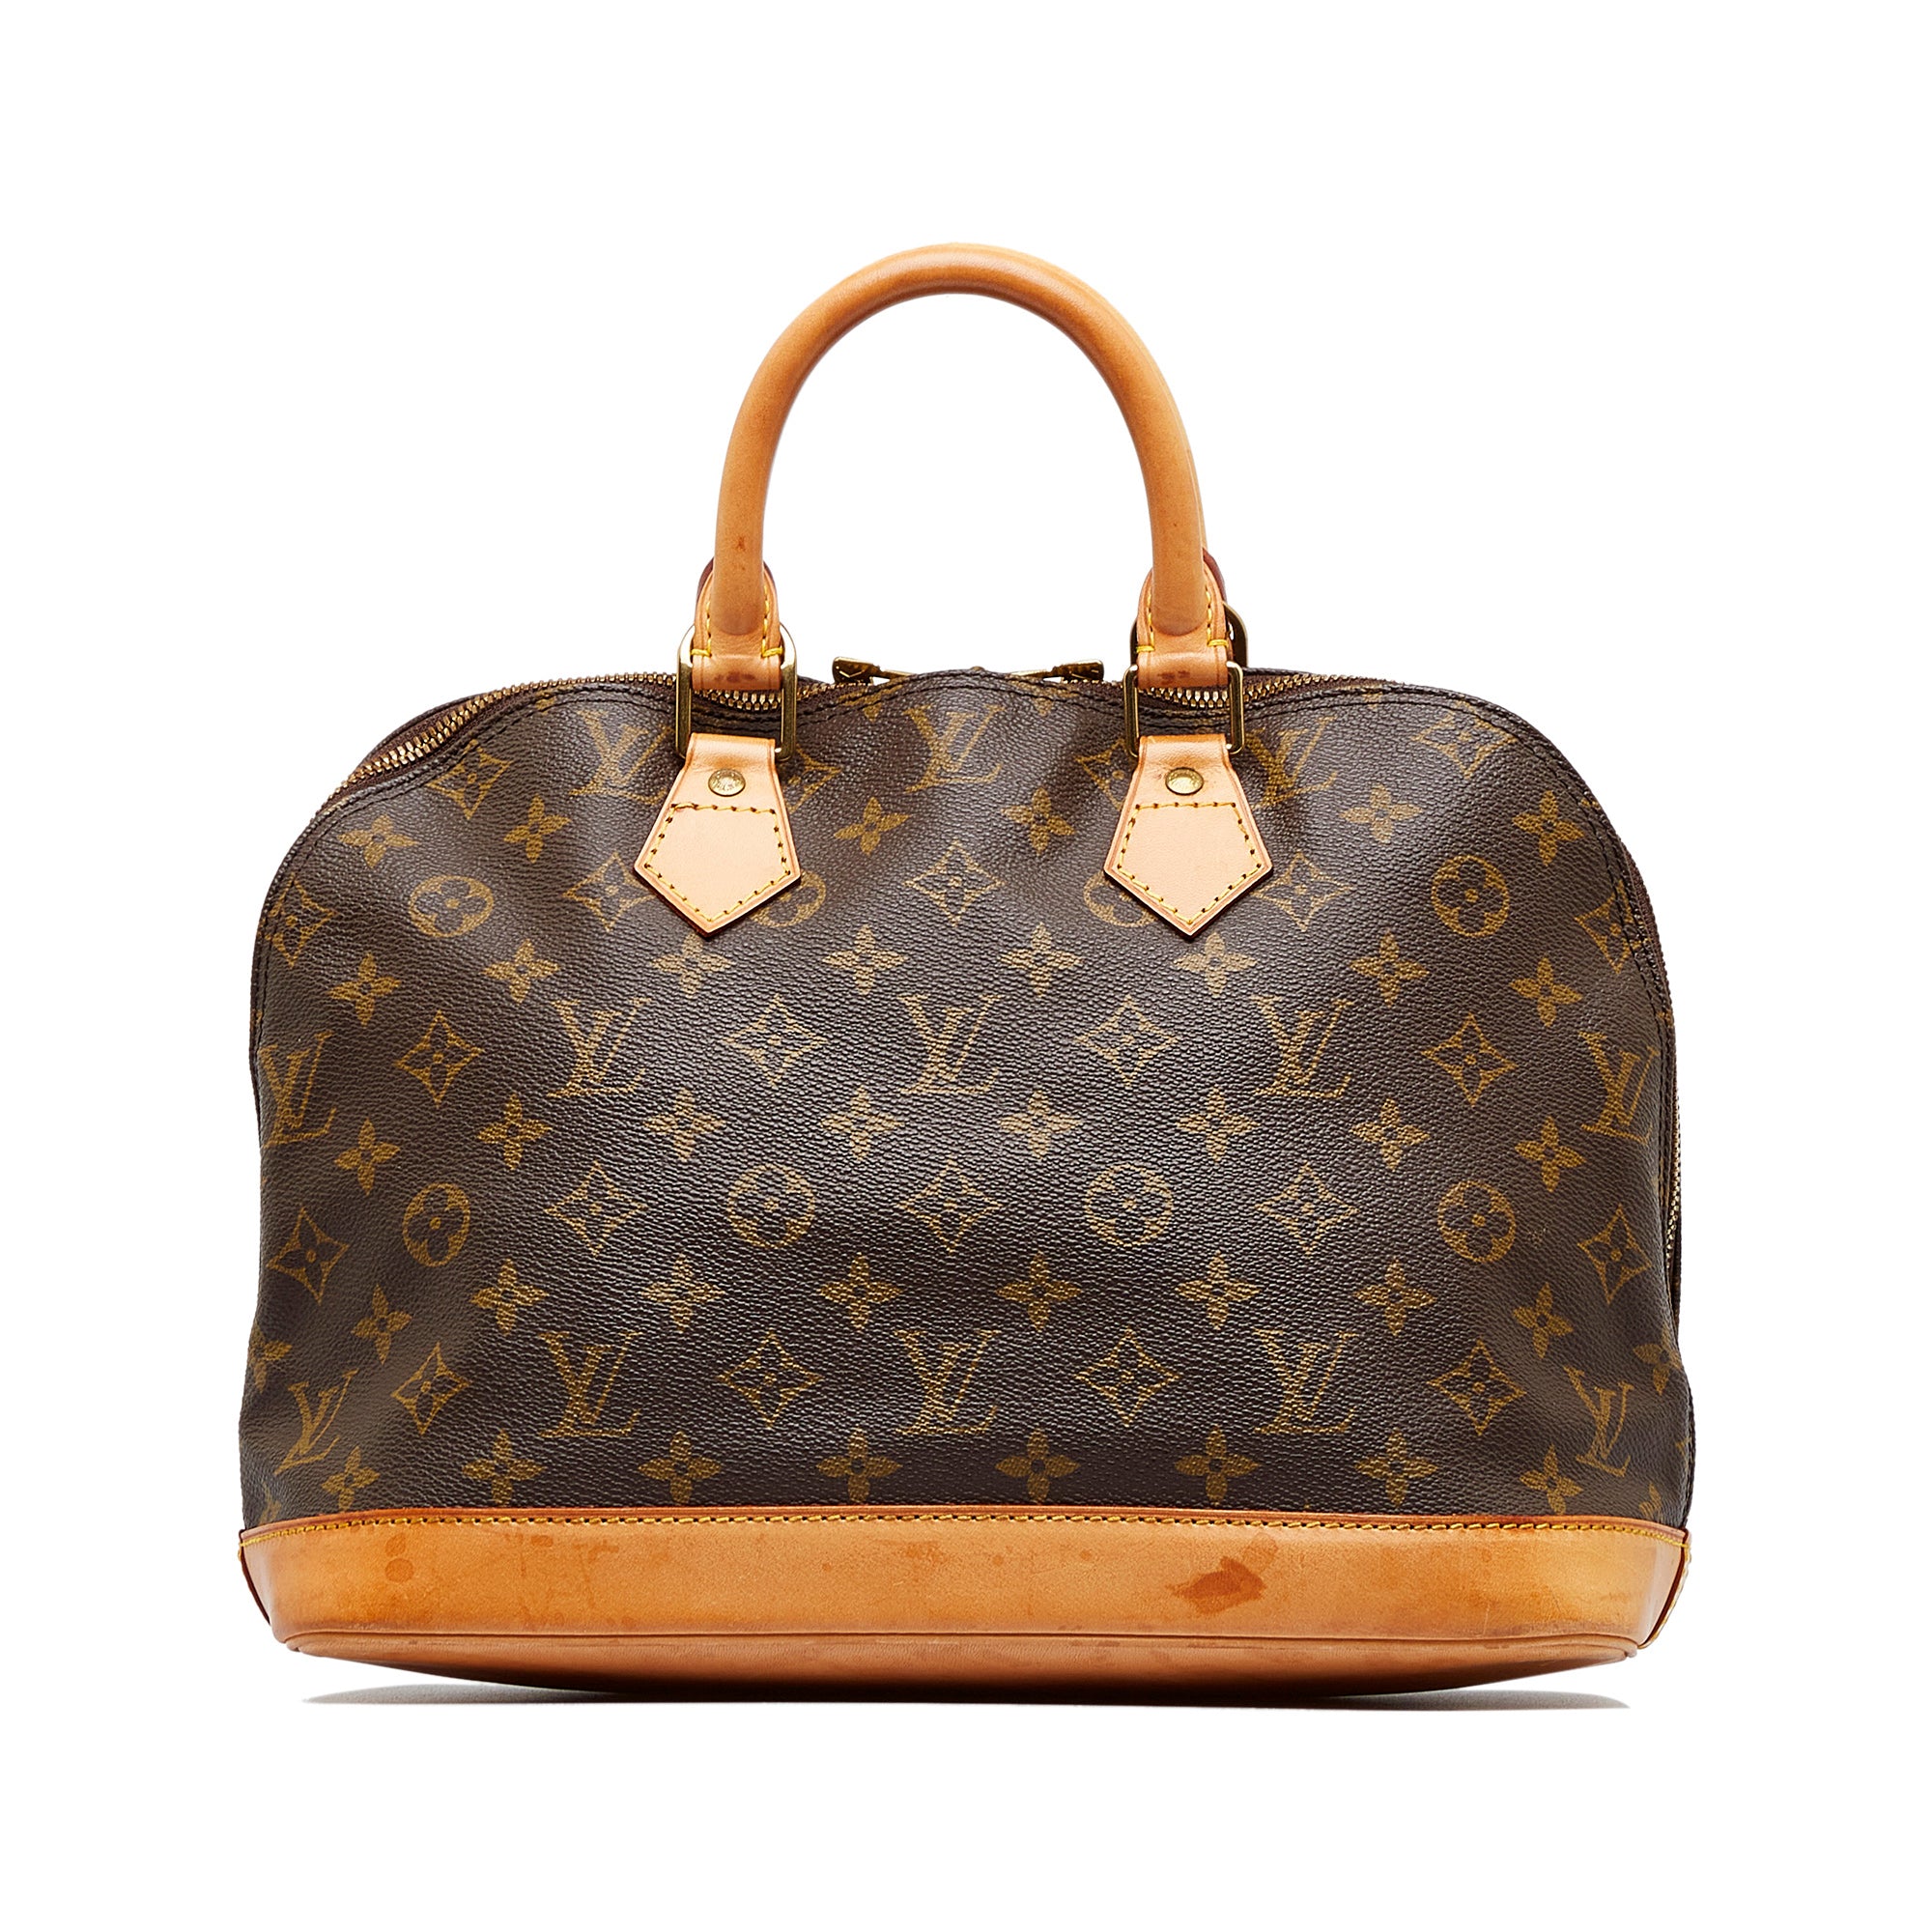 Second Hand Louis Vuitton Bags Page 2, Cra-wallonieShops